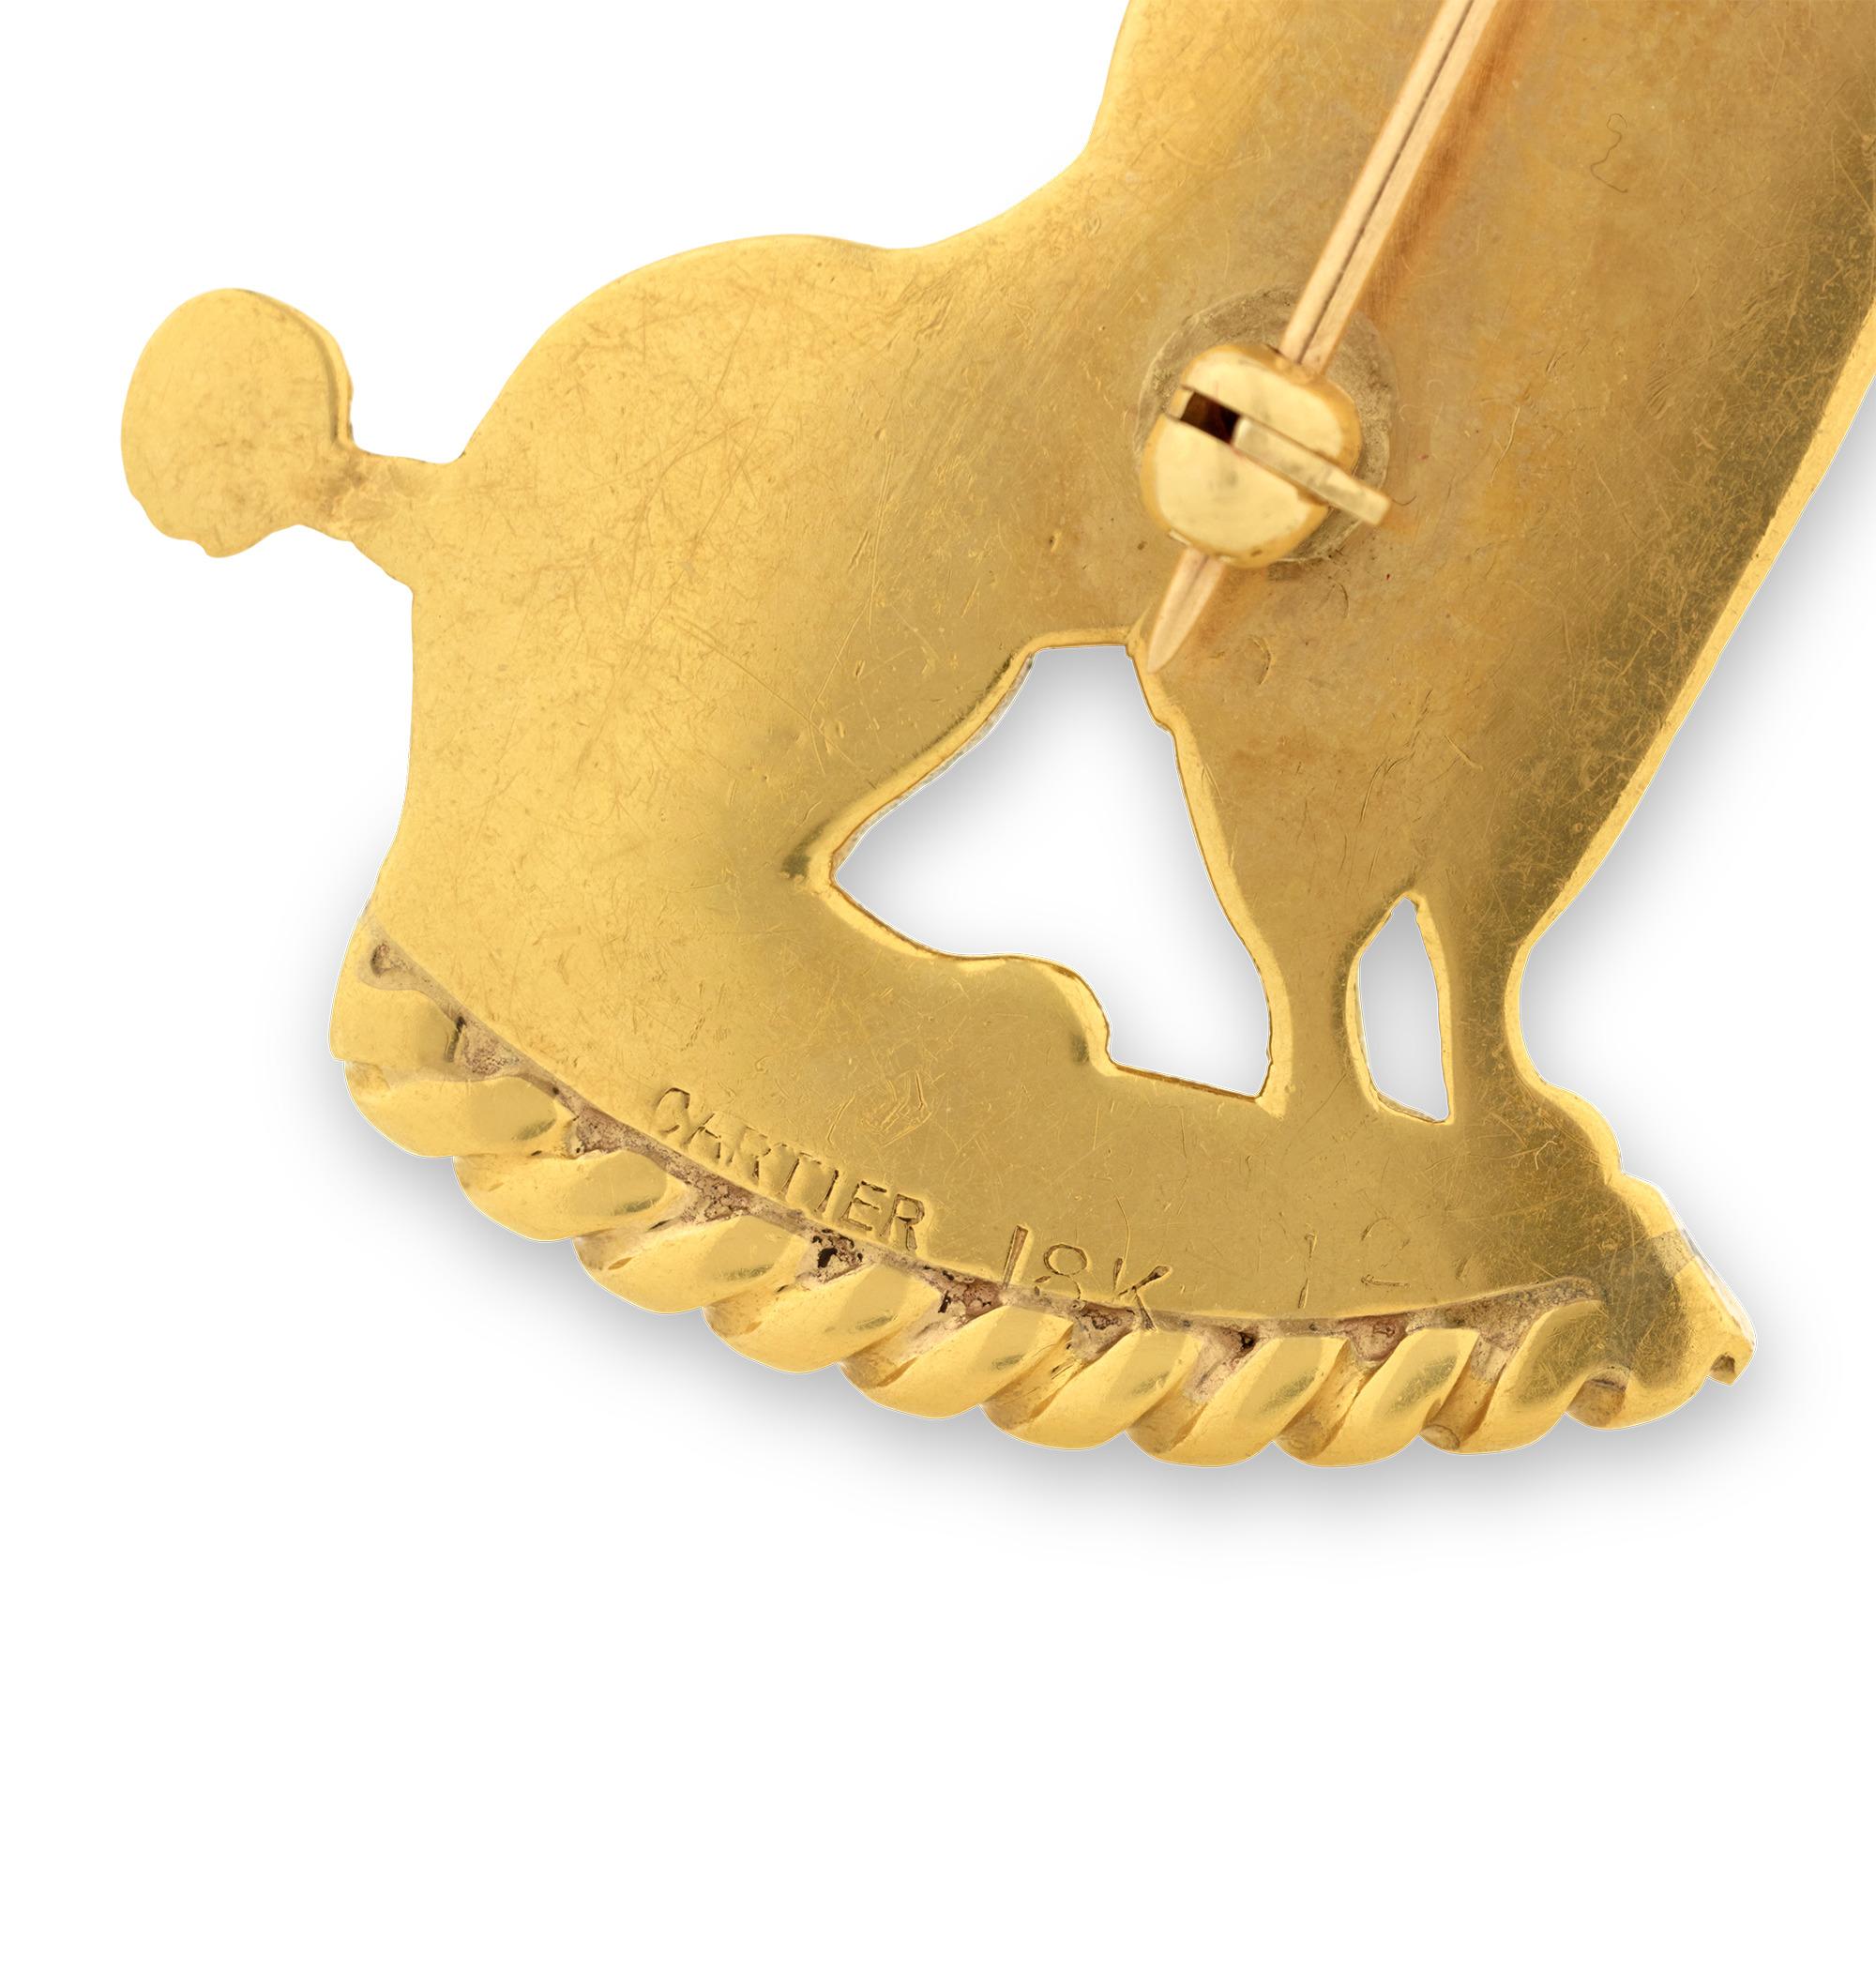 This delightful gold poodle brooch showcases the more whimsical side of the legendary French jeweler Cartier. The playful yet elegant brooch features an 18K gold poodle sitting at attention. The canine accessory is accented by a blue sapphire eye